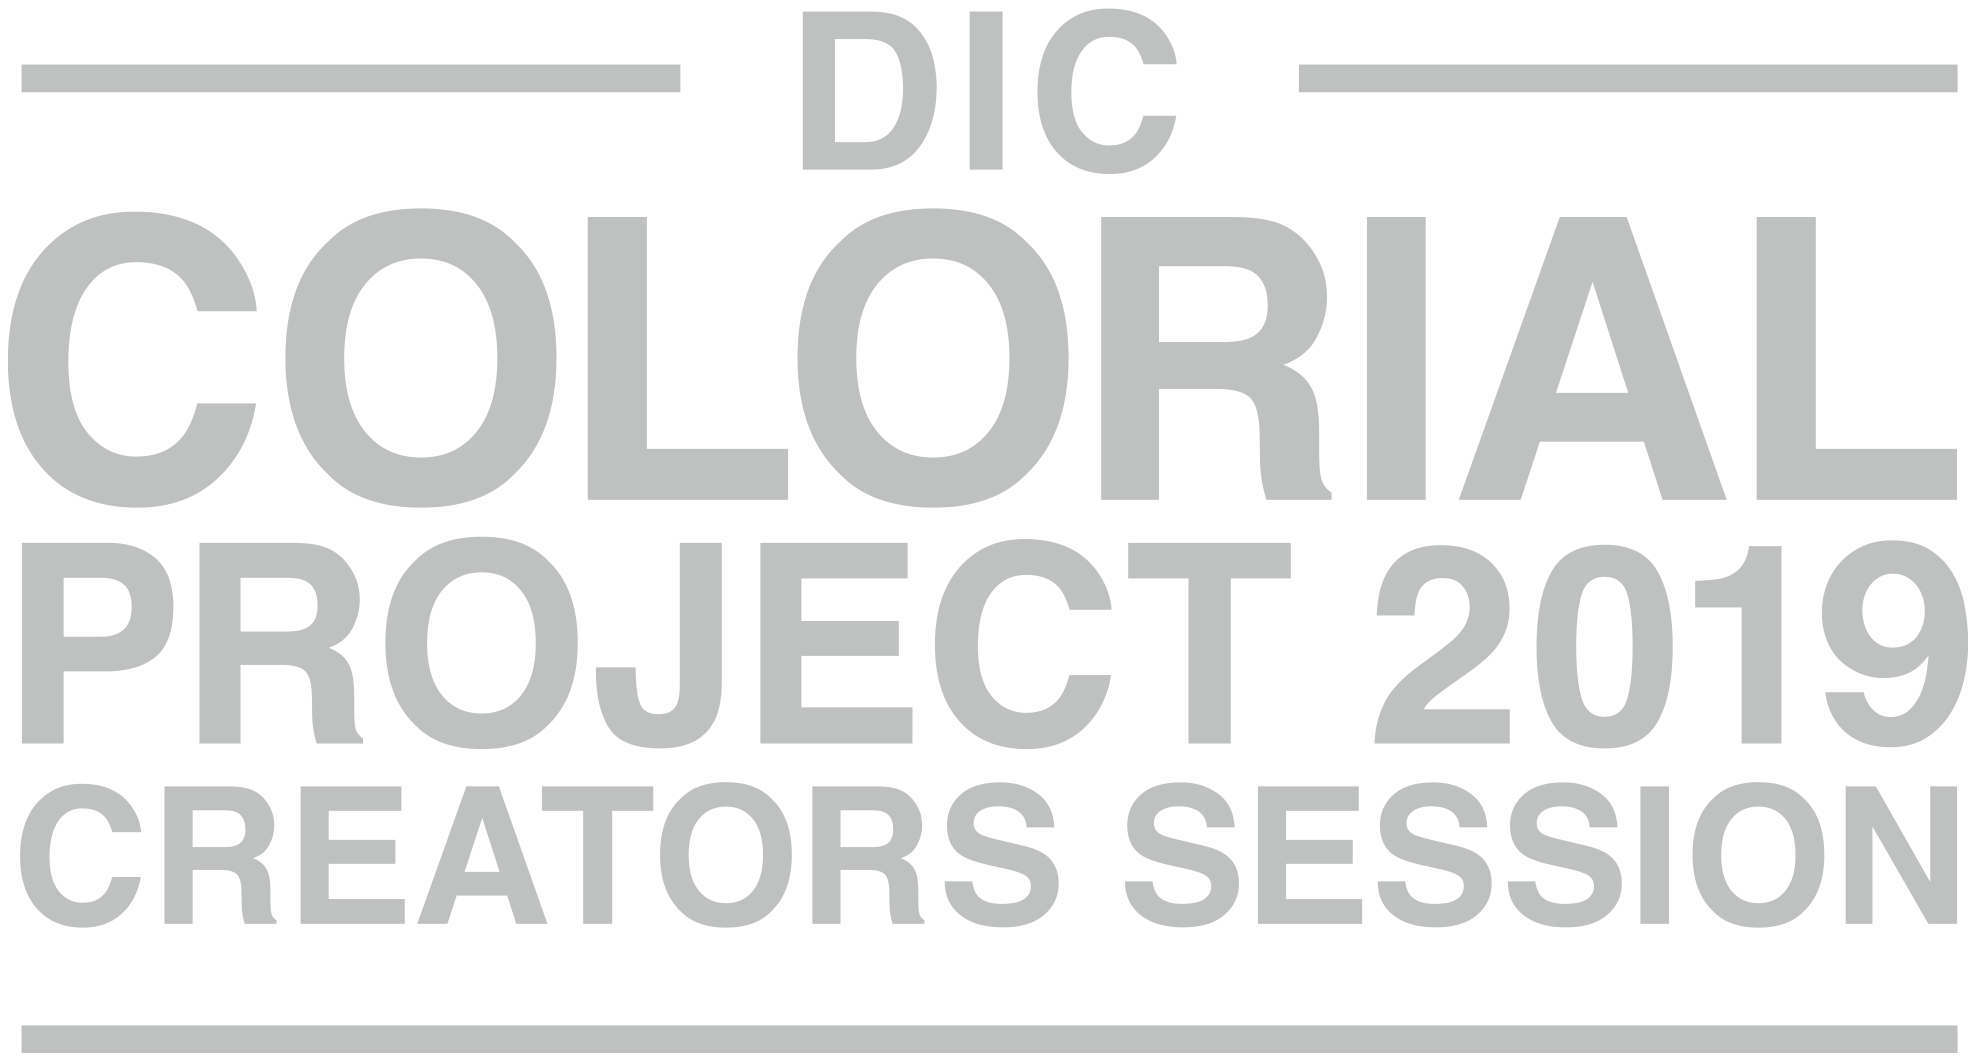 DIC COLORIAL PROJECT 2019 CREATORS SESSION